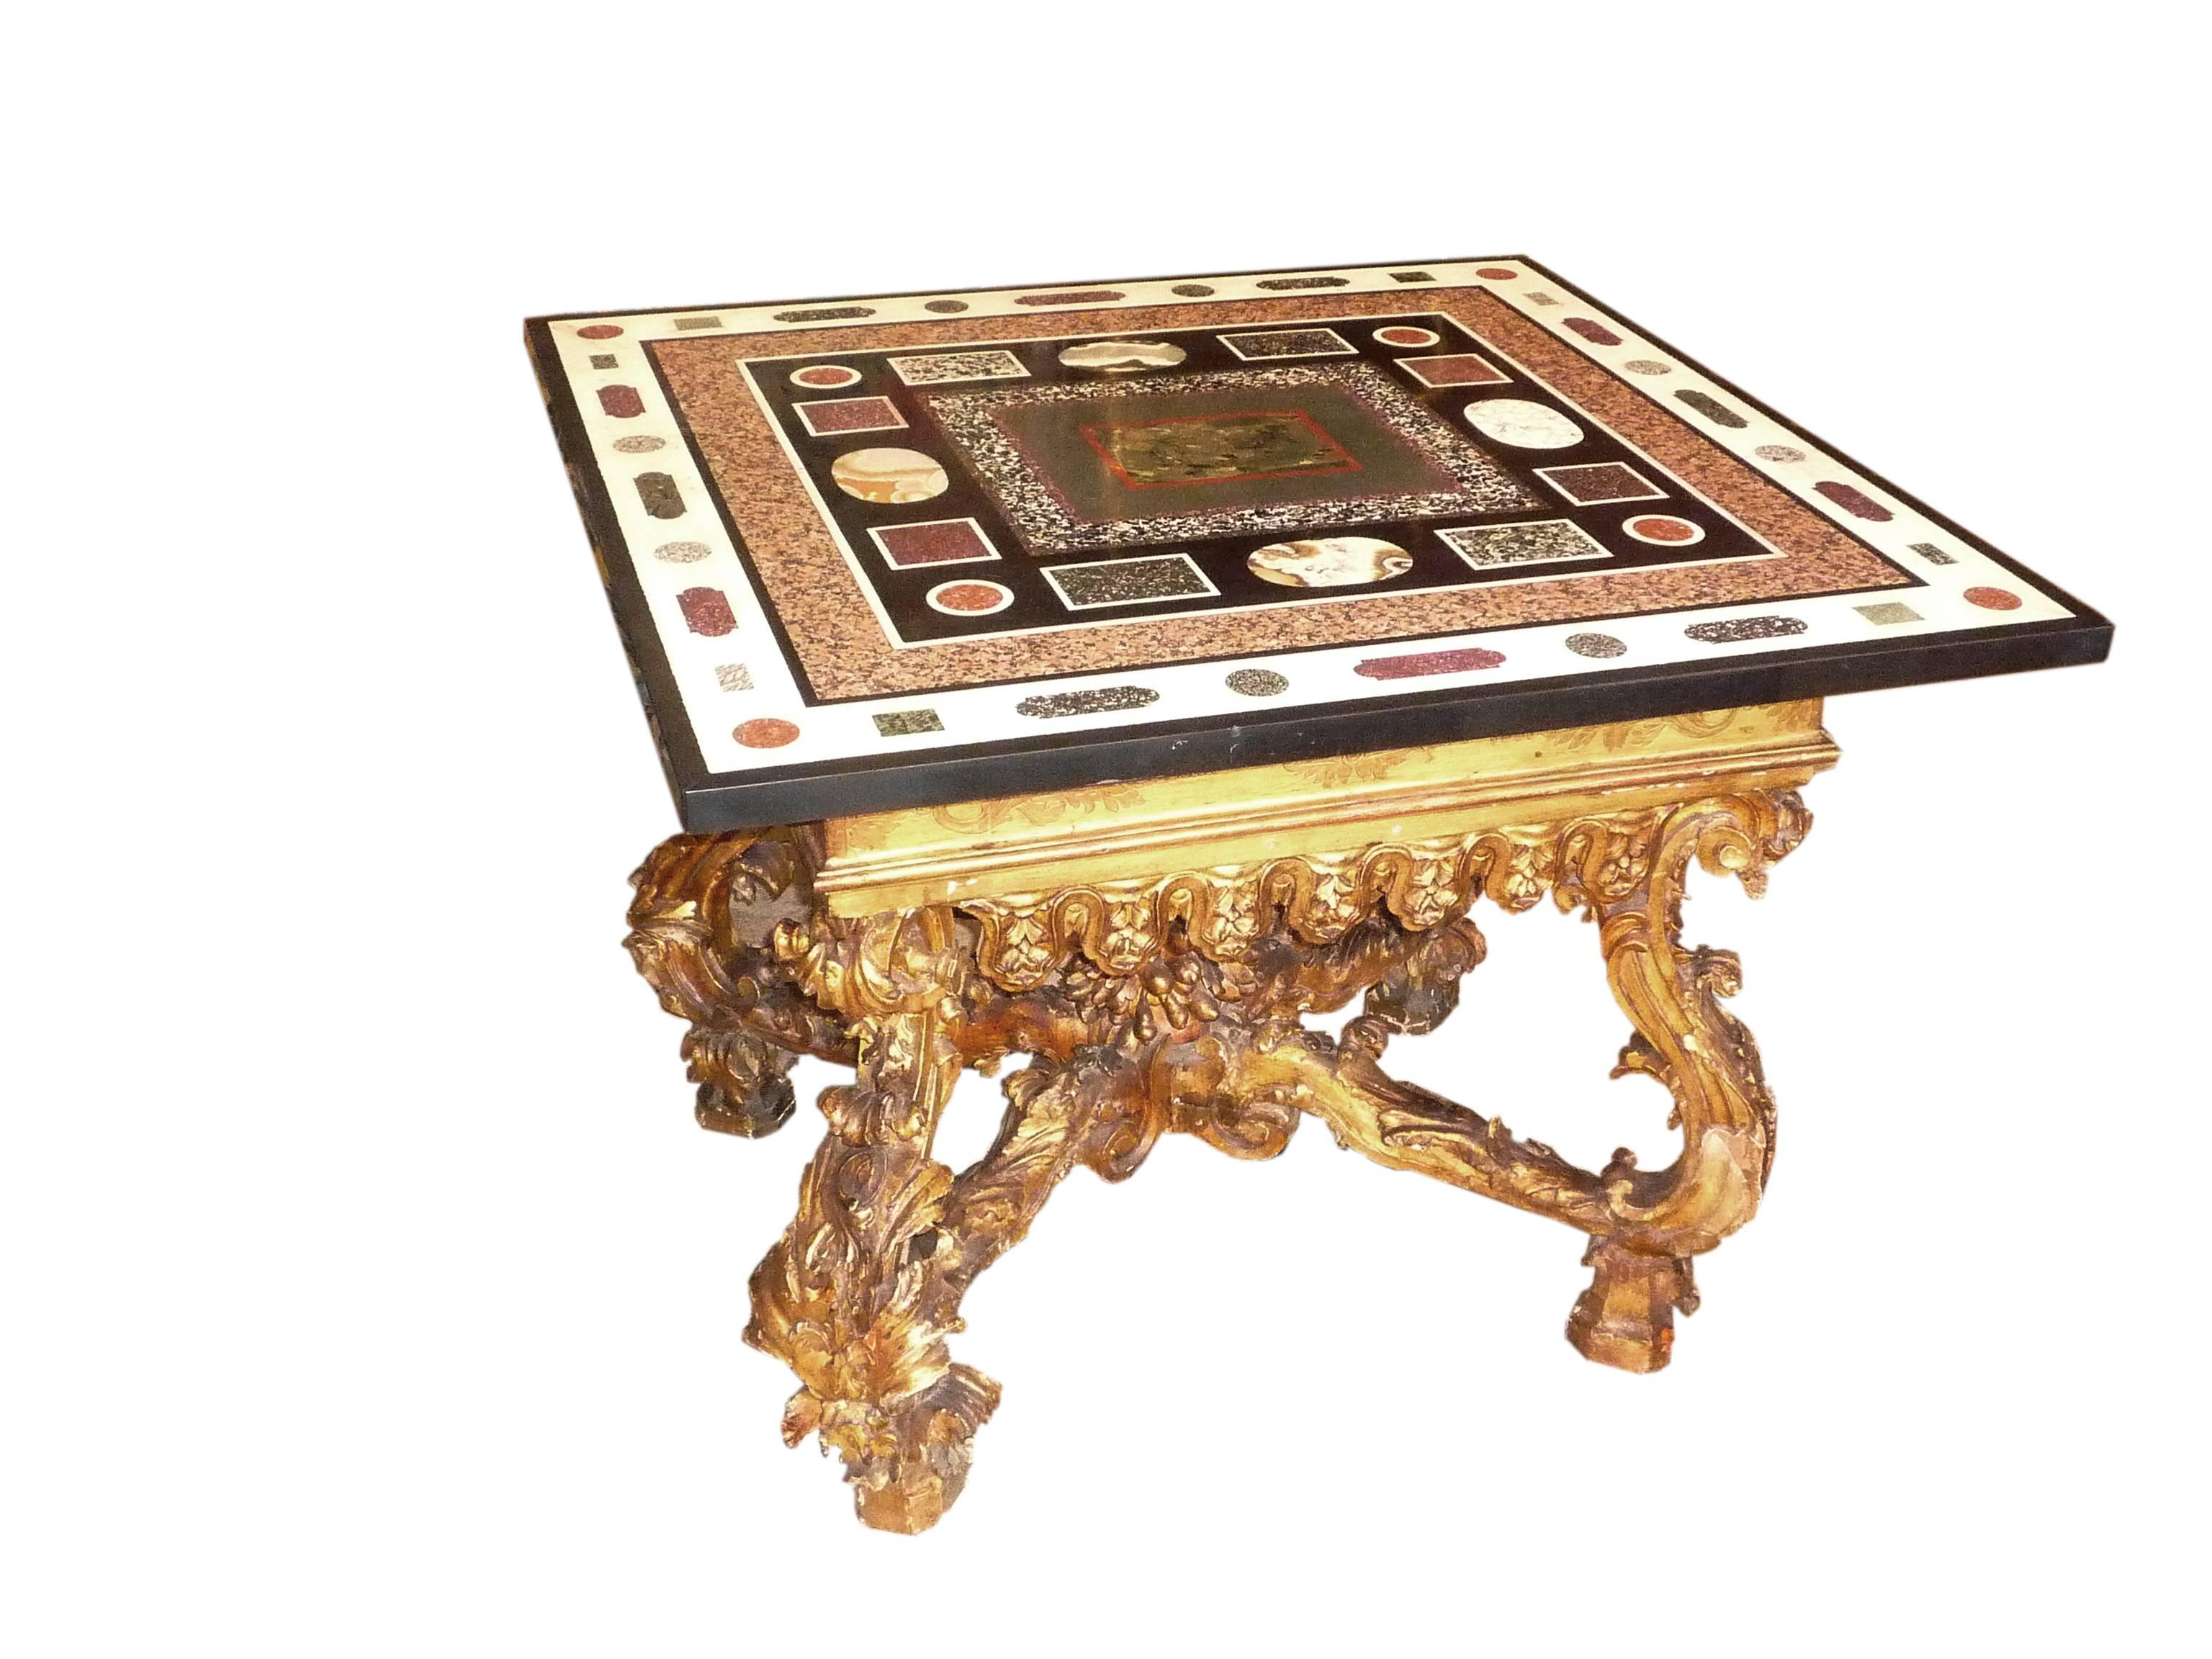 Carved Fine 18th Century Roman Baroque Table with a 19th Century Pietra Dura Top